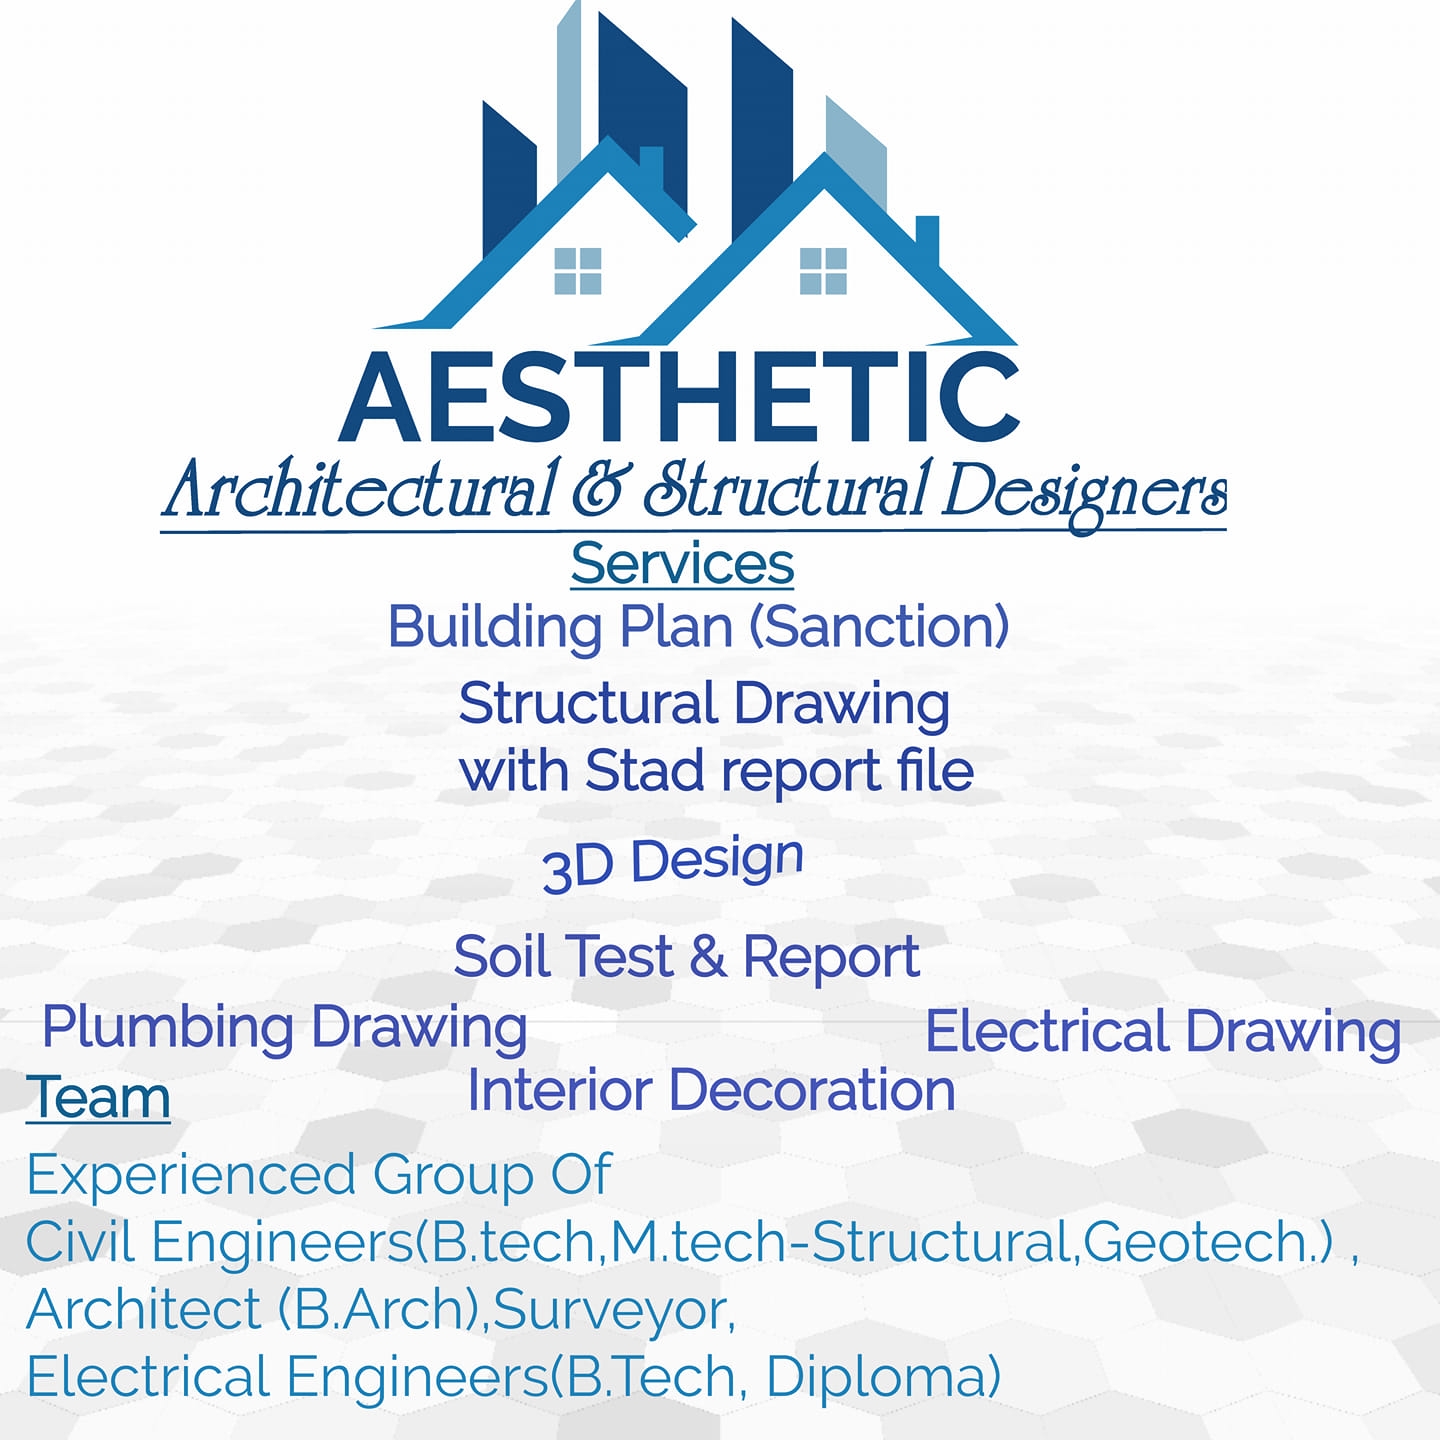 Aesthetic Architectural & Structural Designers|Architect|Professional Services